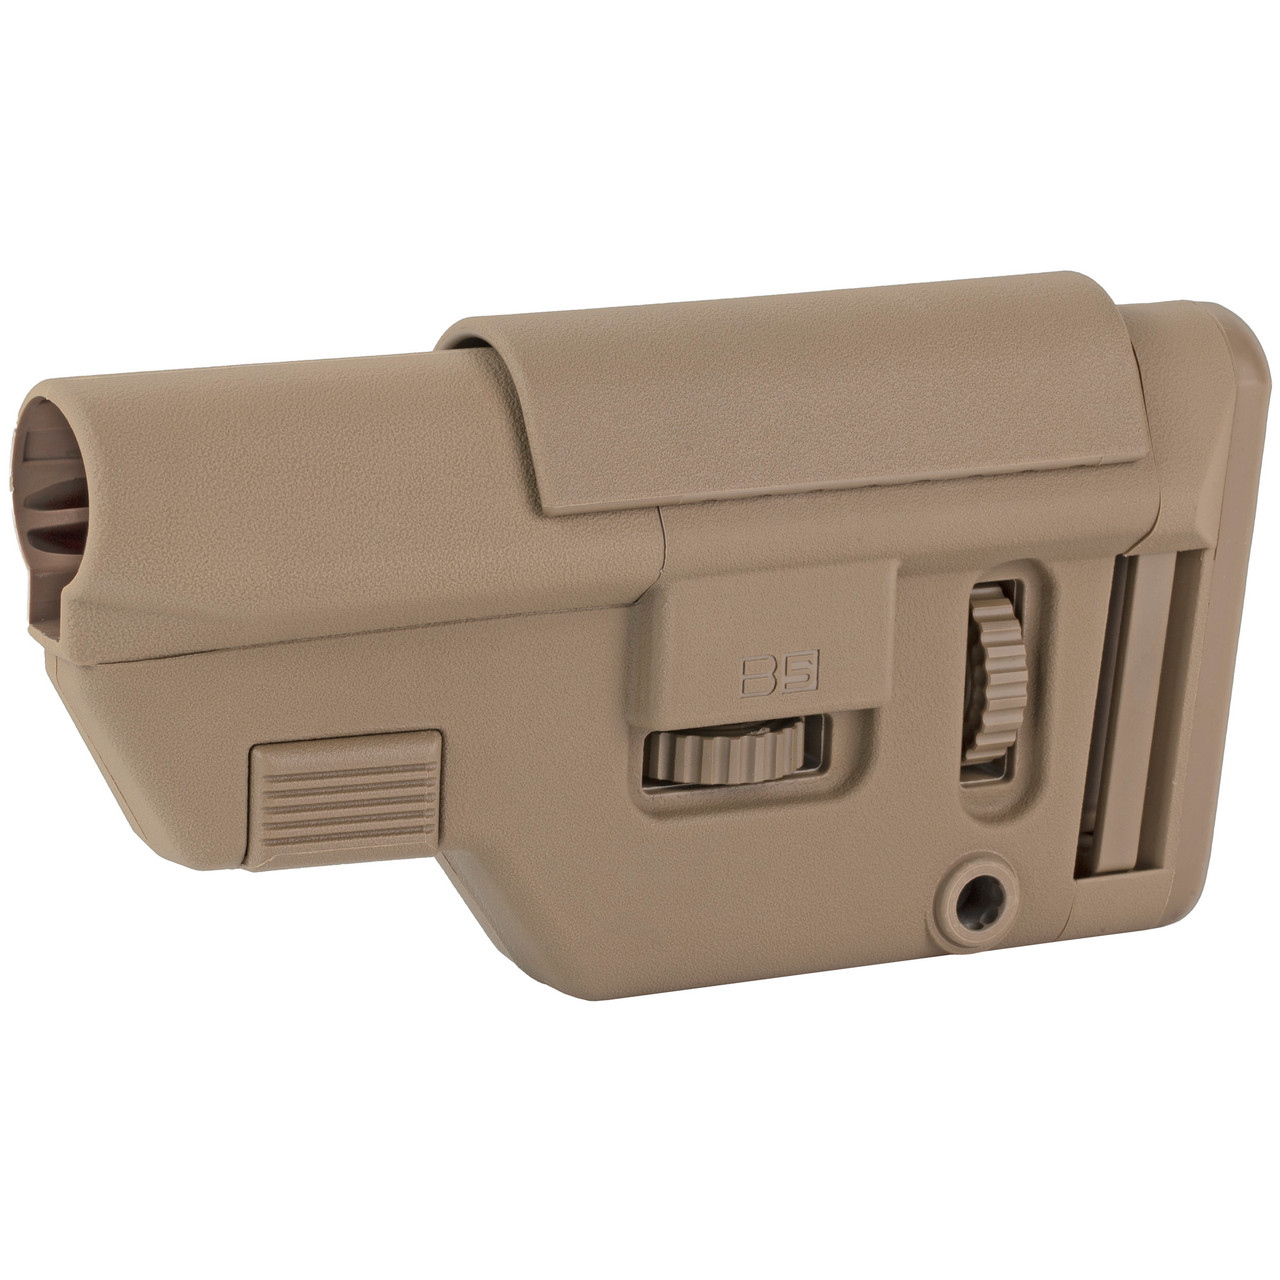 B5 Systems CPS-1305 Collapsible Prec Stk Med Fde